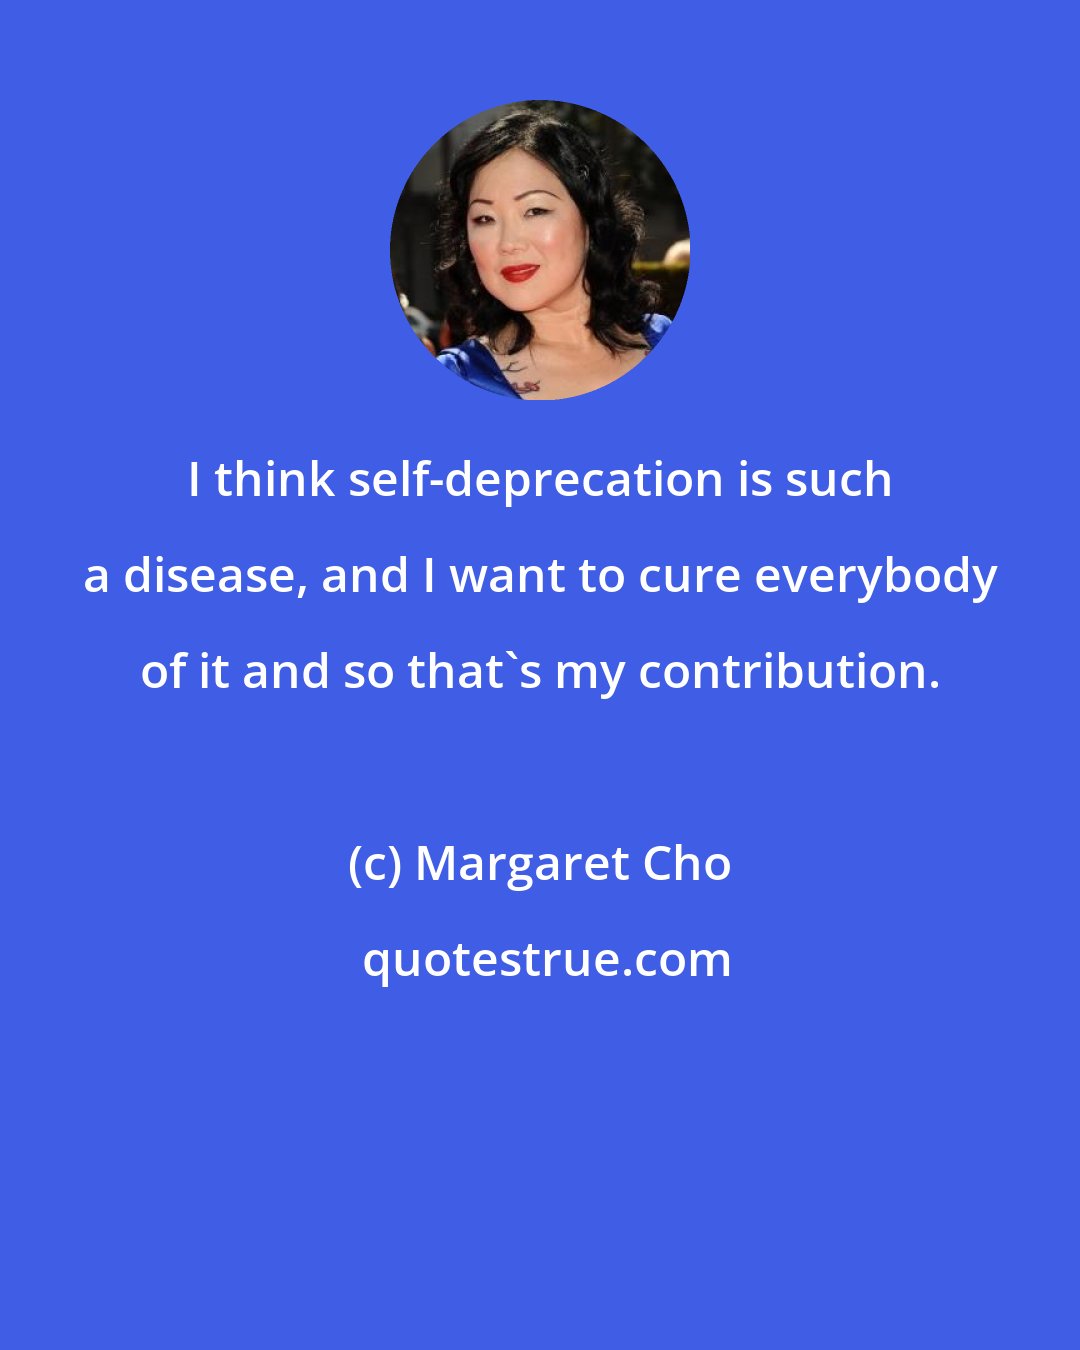 Margaret Cho: I think self-deprecation is such a disease, and I want to cure everybody of it and so that's my contribution.